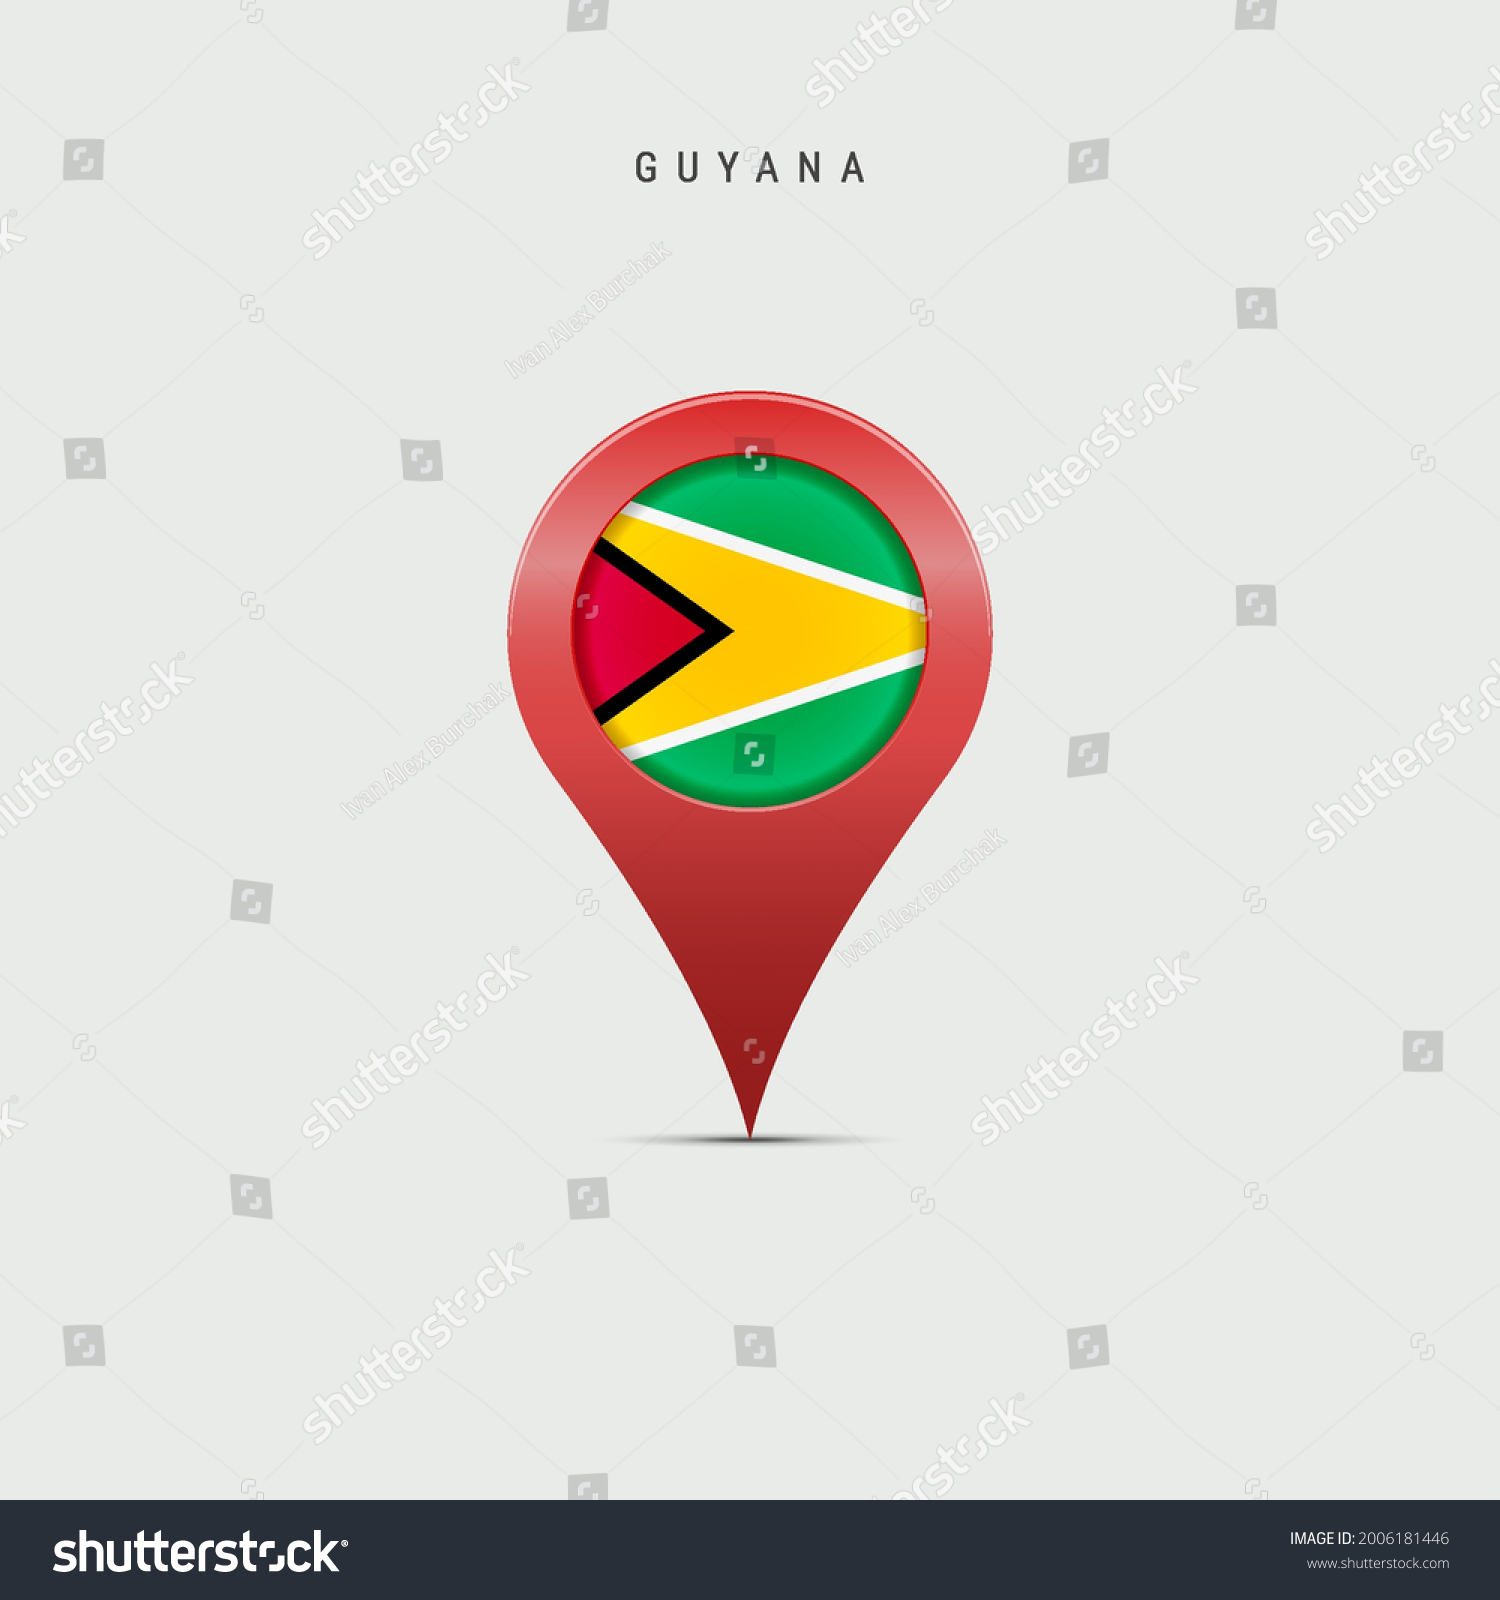 SVG of Teardrop map marker with flag of Guyana. Guyanese flag inserted in the location map pin. Vector illustration isolated on light grey background. svg